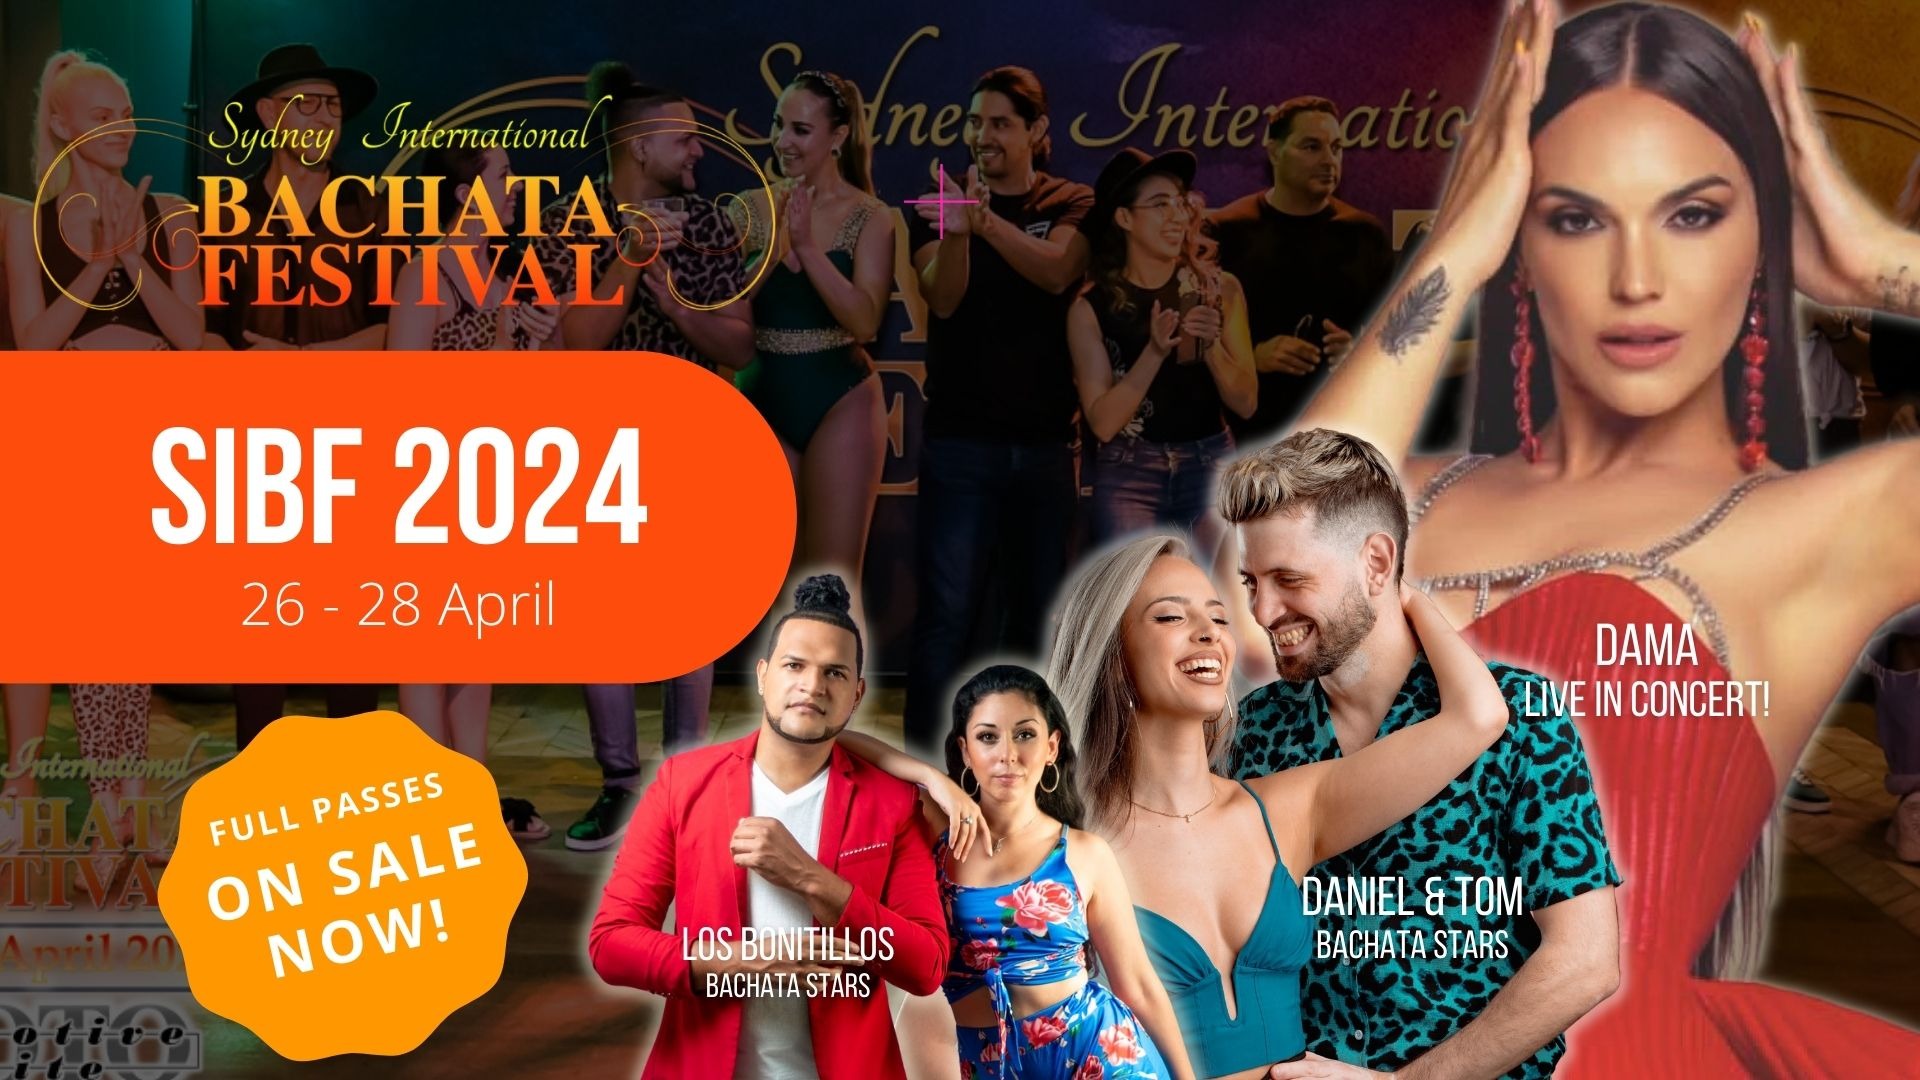 2024 SYDNEY BACHATA FESTIVAL Tickets, West HQ, Rooty Hill TryBooking